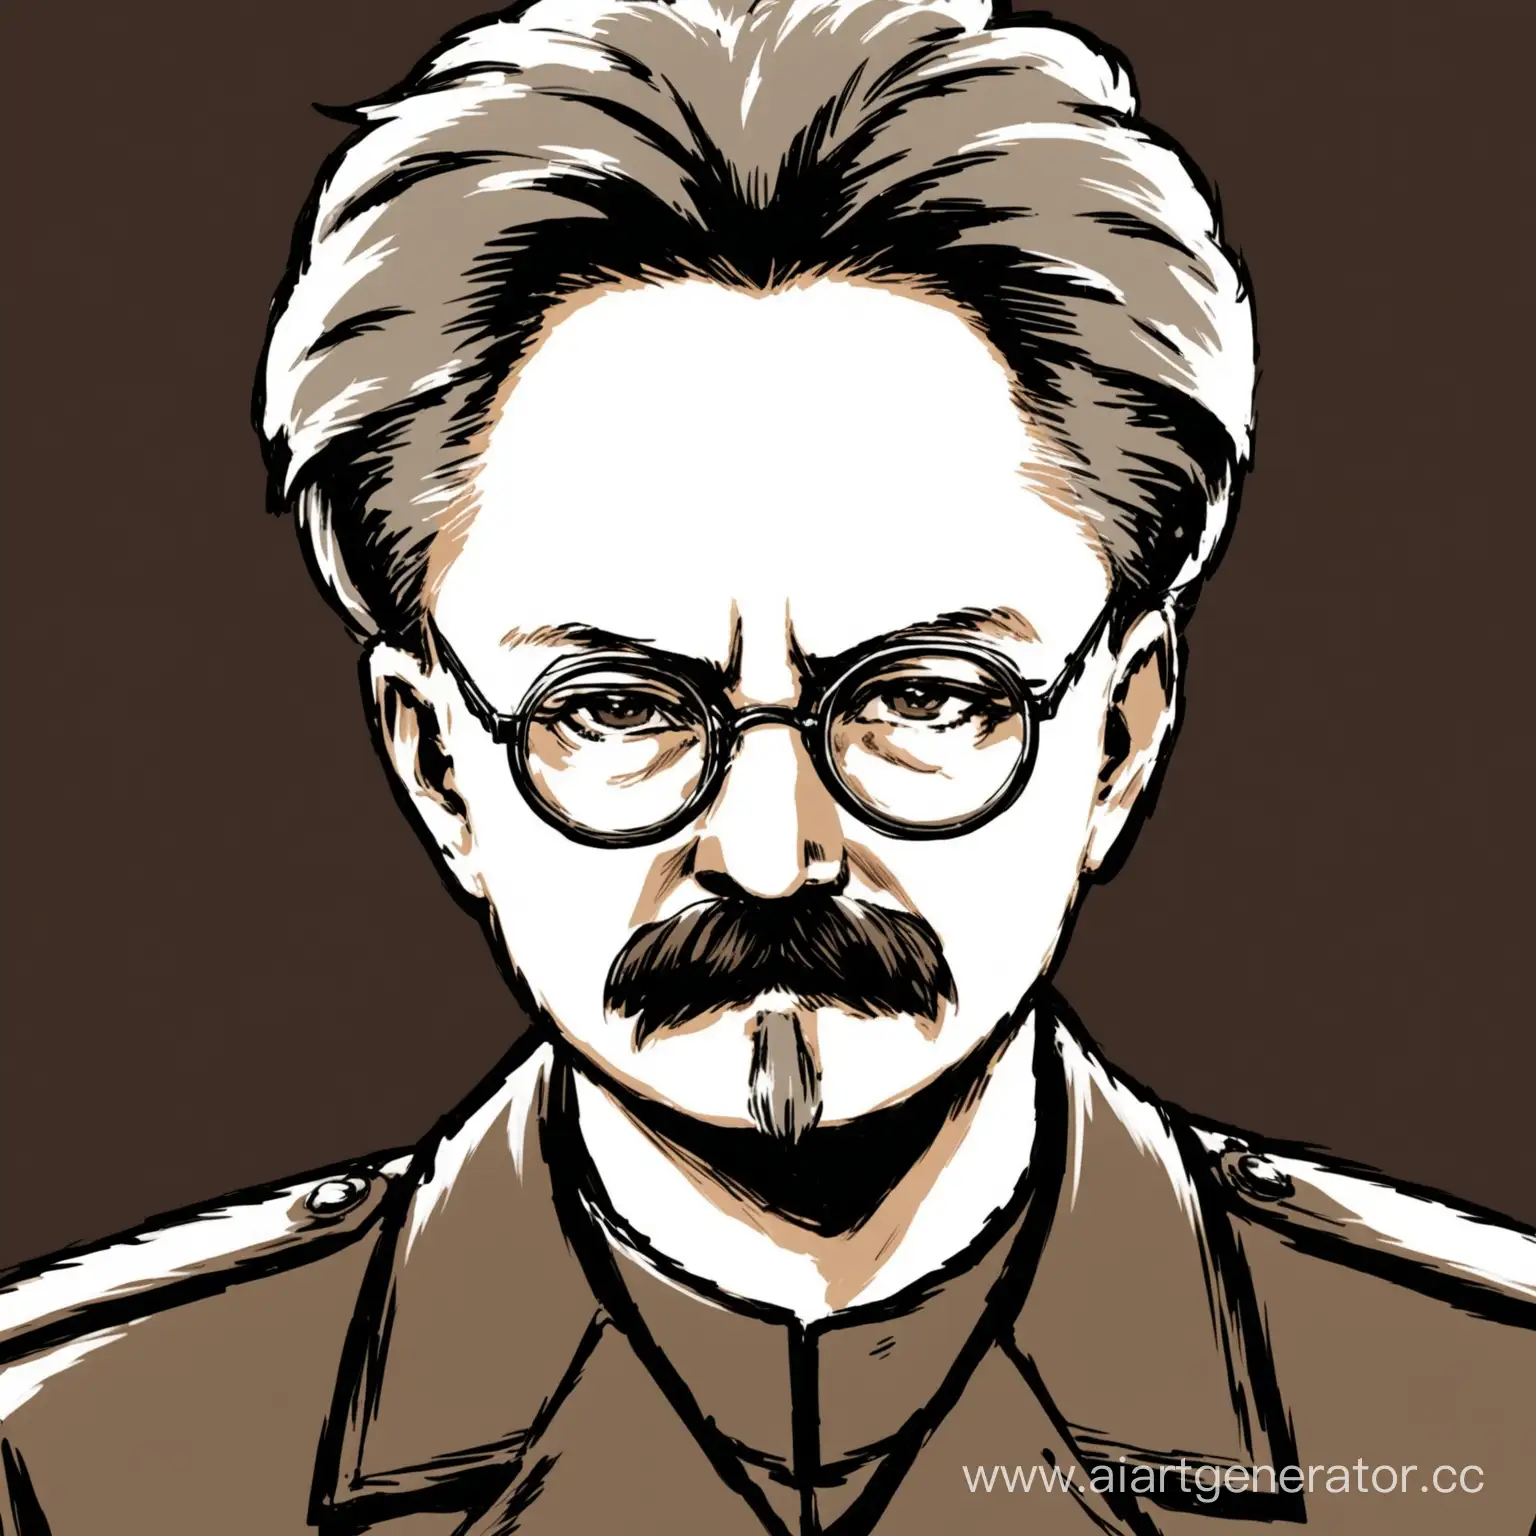 Lev-Trotsky-with-Elongated-Pointed-Ears-Revolutionary-Leader-Portrait